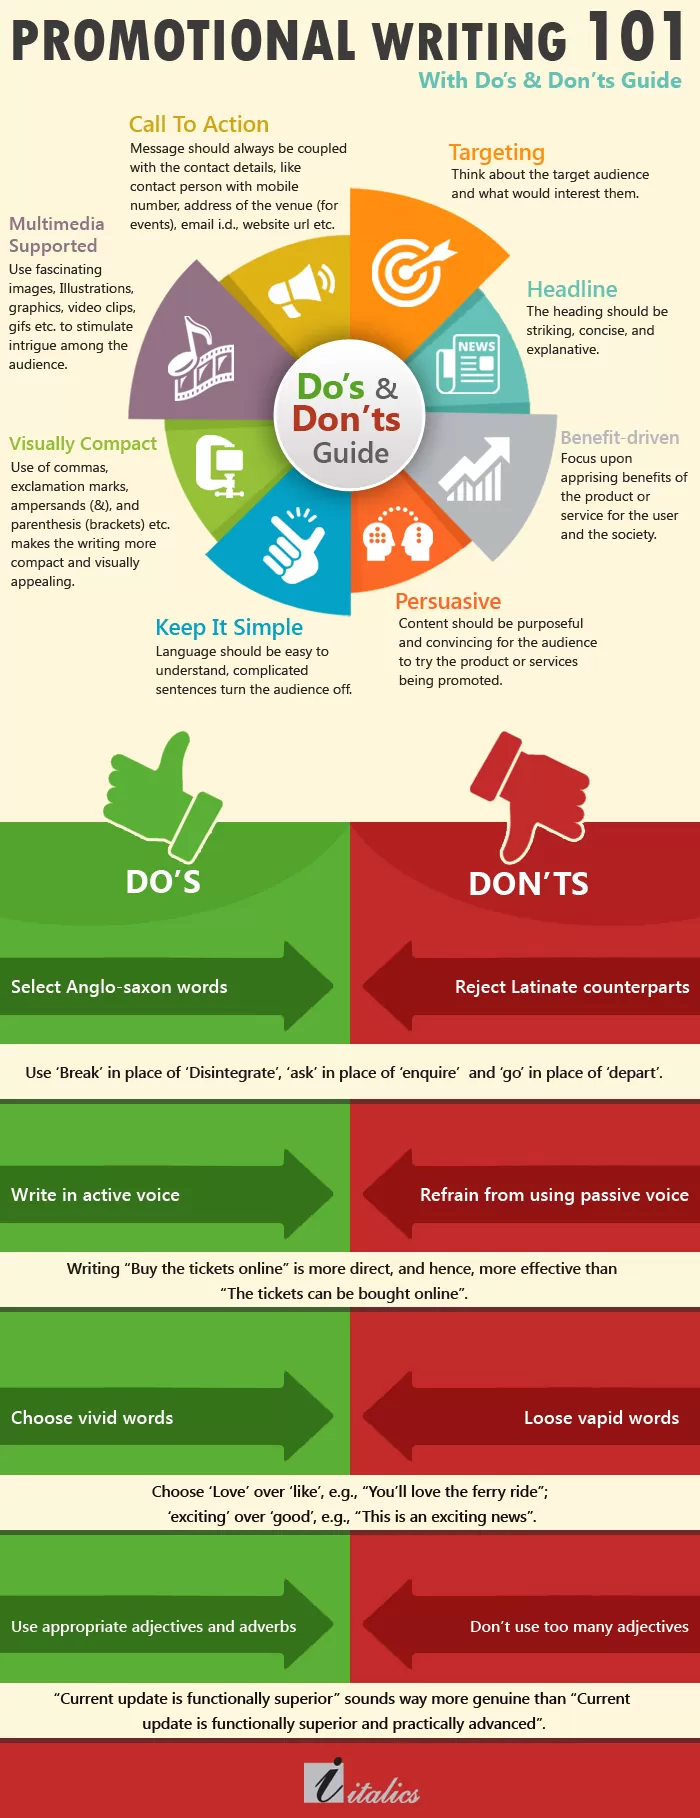 How-To-Write-Outstanding-Promotional-Content-Infographic (1)